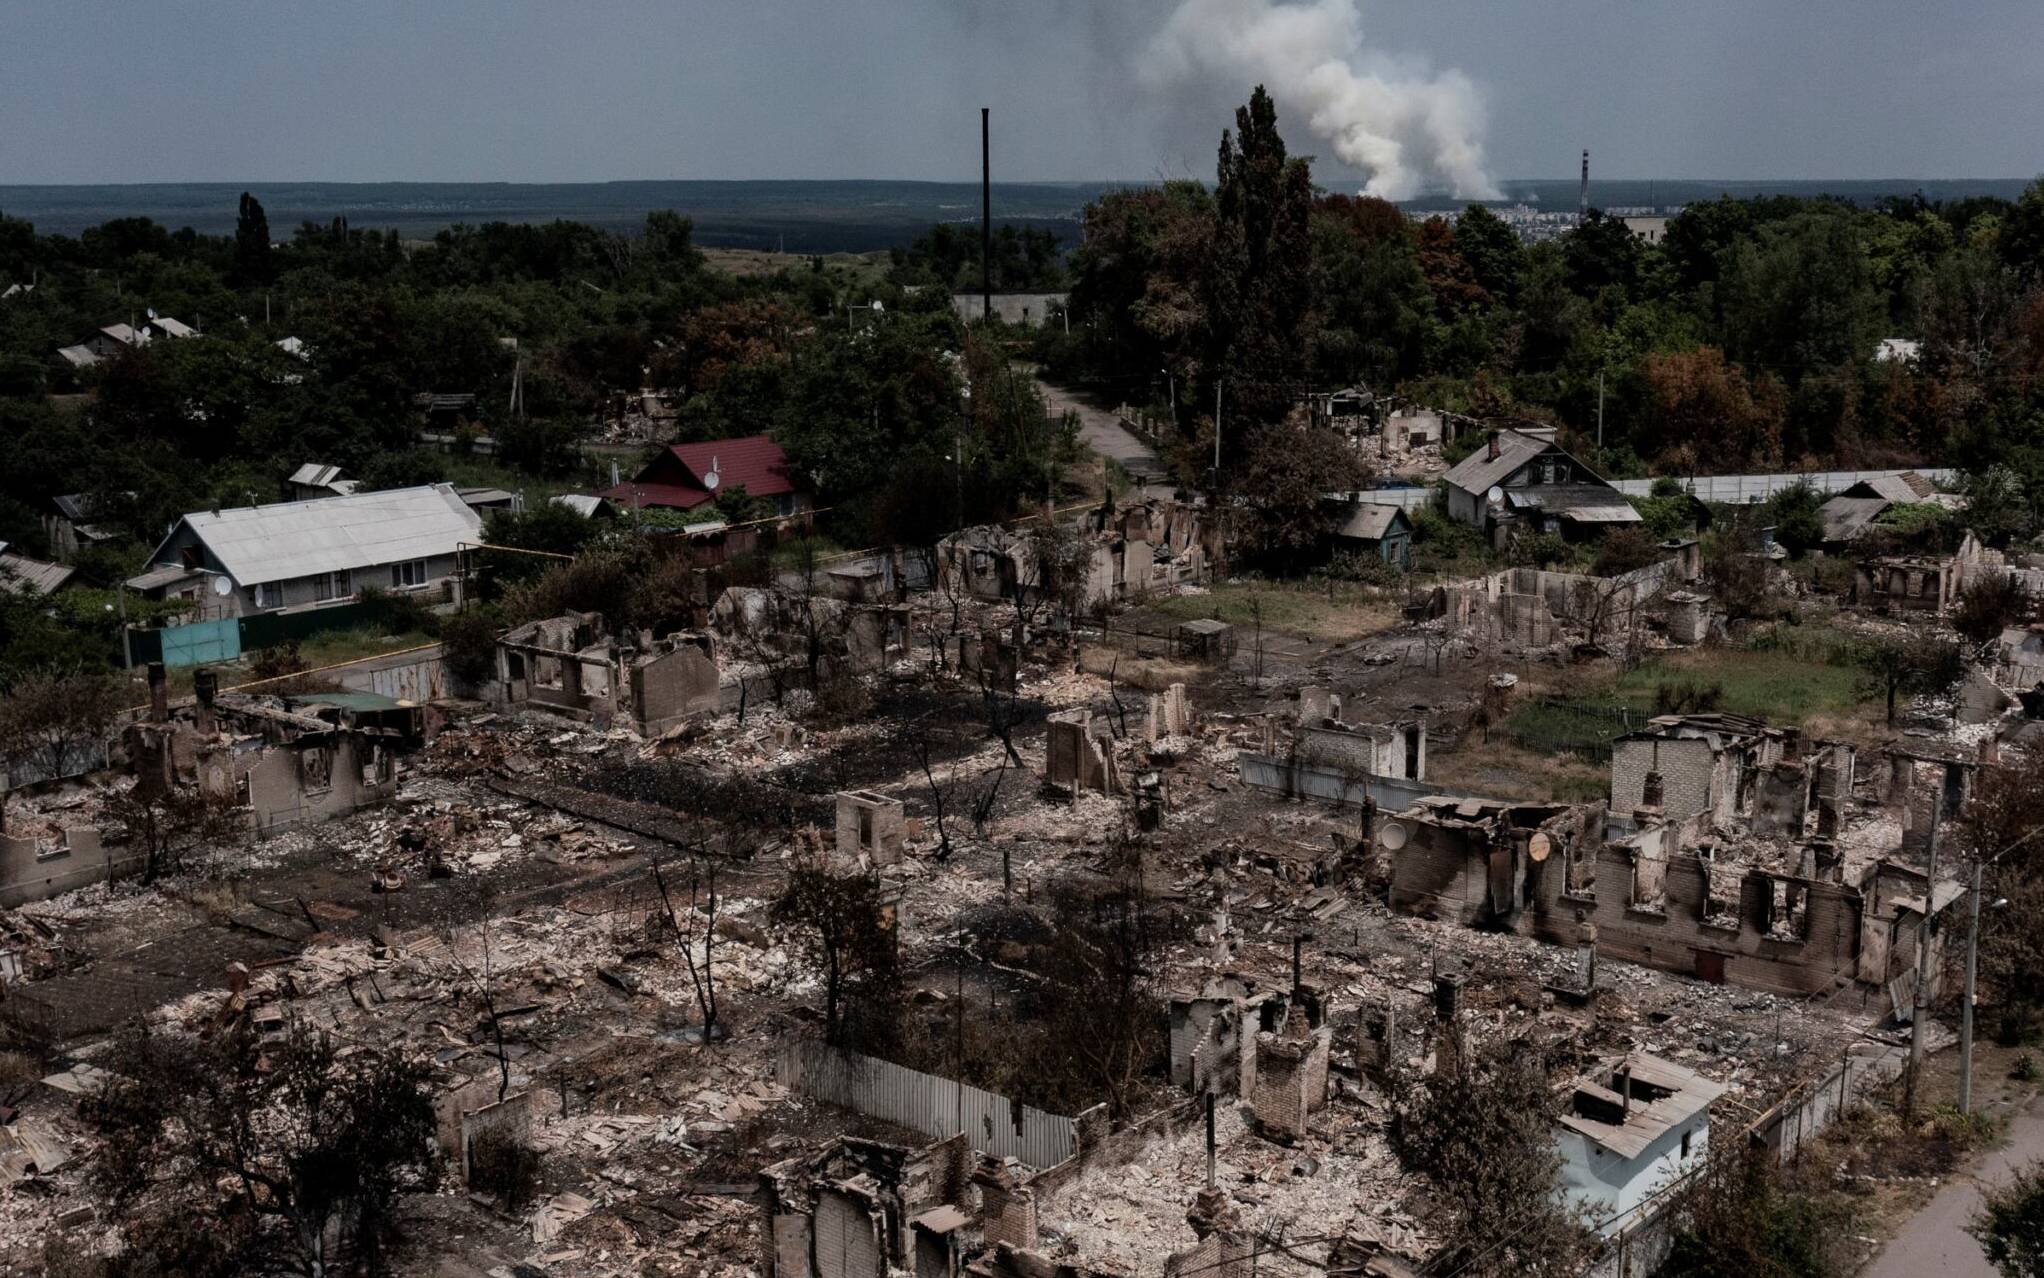 An aerial view shows destroyed houses after strike in the town of Pryvillya at the eastern Ukrainian region of Donbas on June 14, 2022, amid Russian invasion of Ukraine. - The cities of Severodonetsk and Lysychansk, which are separated by a river, have been targeted for weeks as the last areas still under Ukrainian control in the eastern Lugansk region. (Photo by ARIS MESSINIS / AFP)